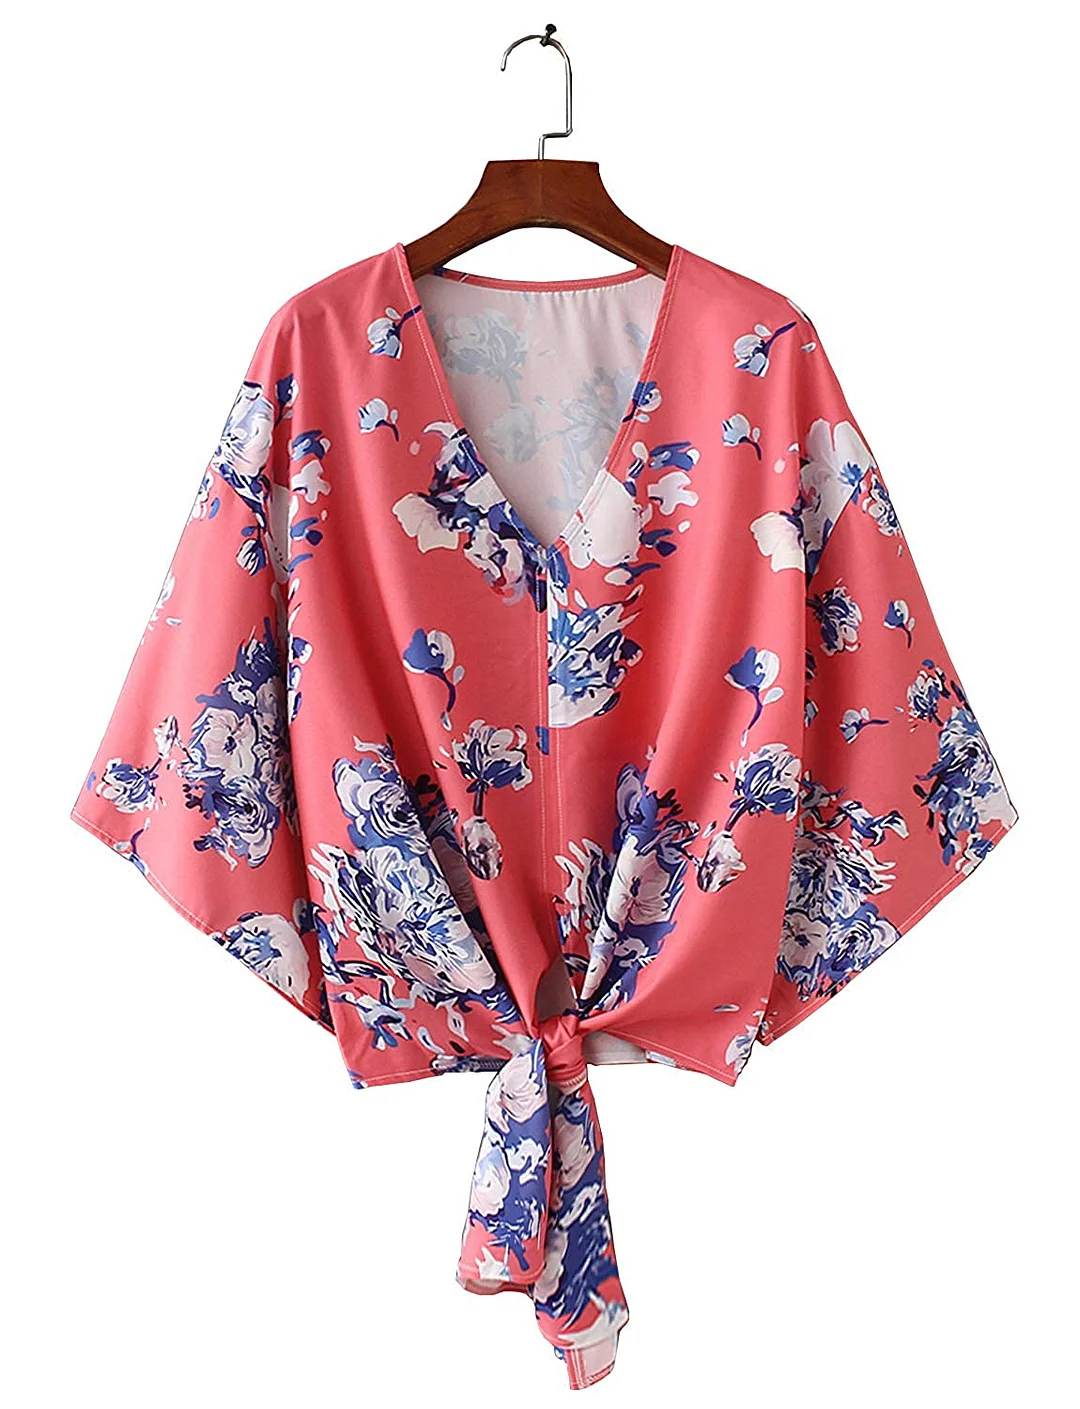 Womens Floral Blouse Tops V Neck Tie Knot Front Short Bell Sleeve Tops Shirts Wraps